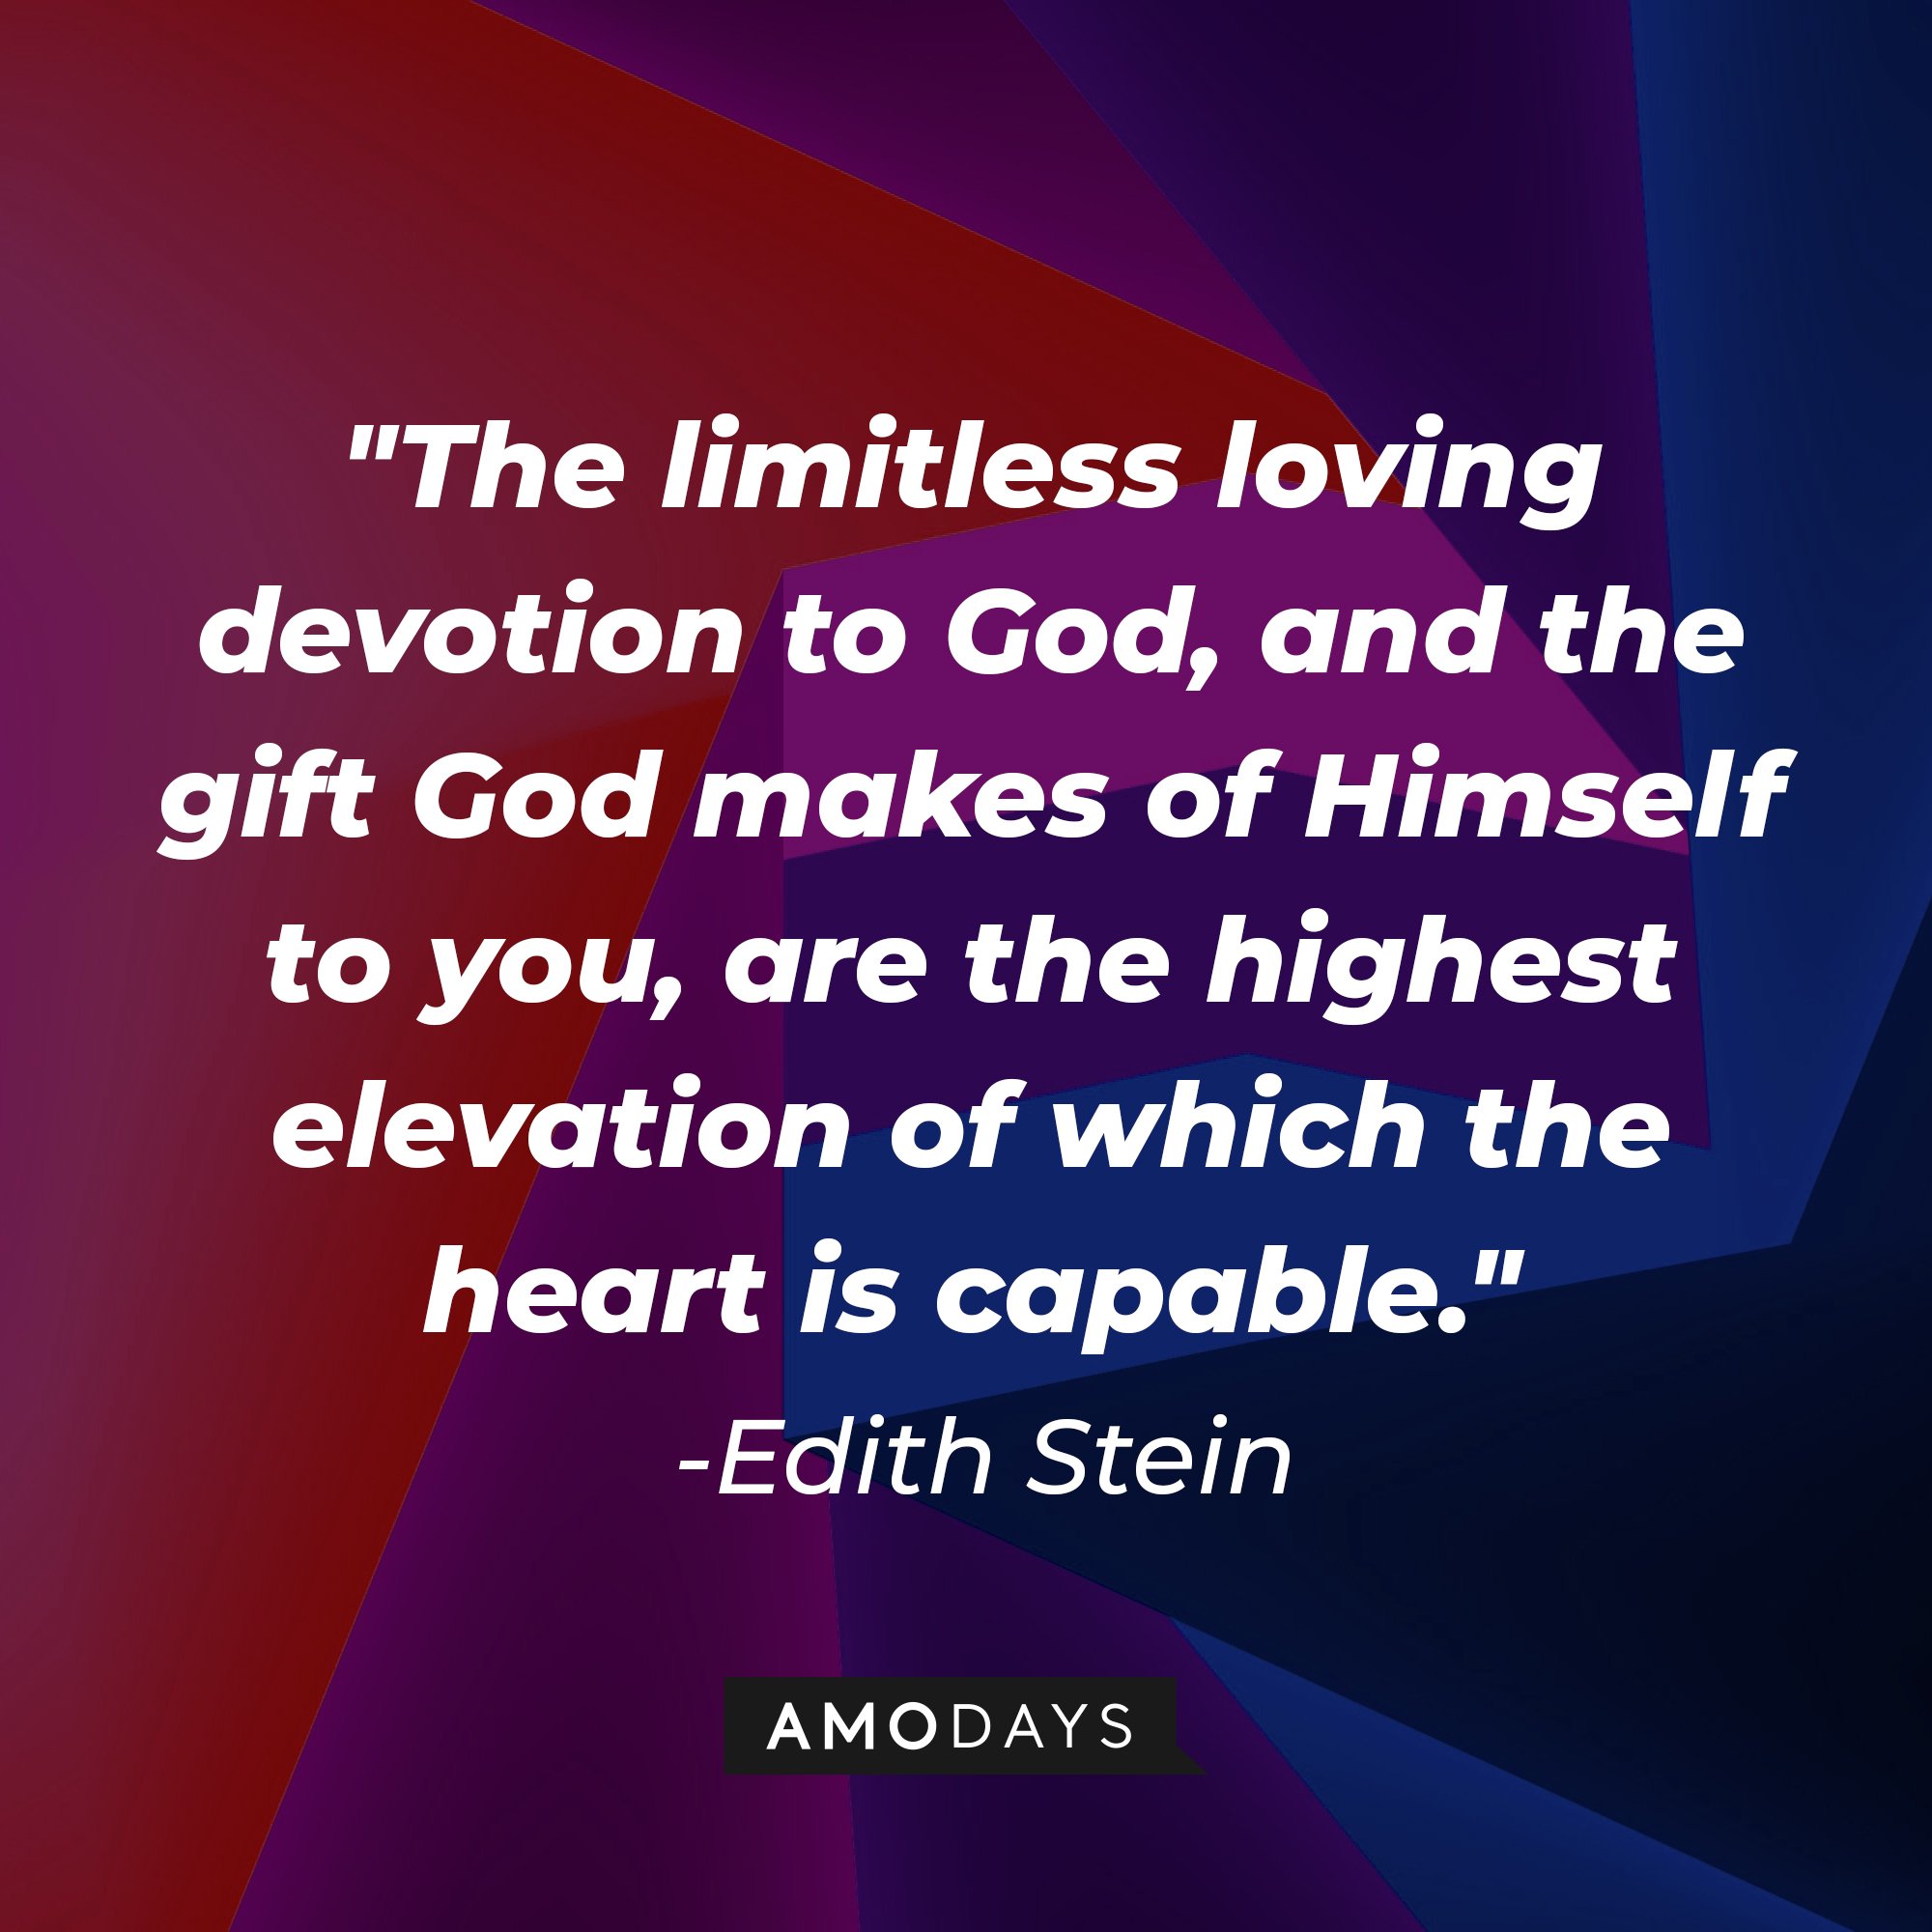 Edith Stein’s quote: "The limitless loving devotion to God, and the gift God makes of Himself to you, are the highest elevation of which the heart is capable." | Image: AmoDays